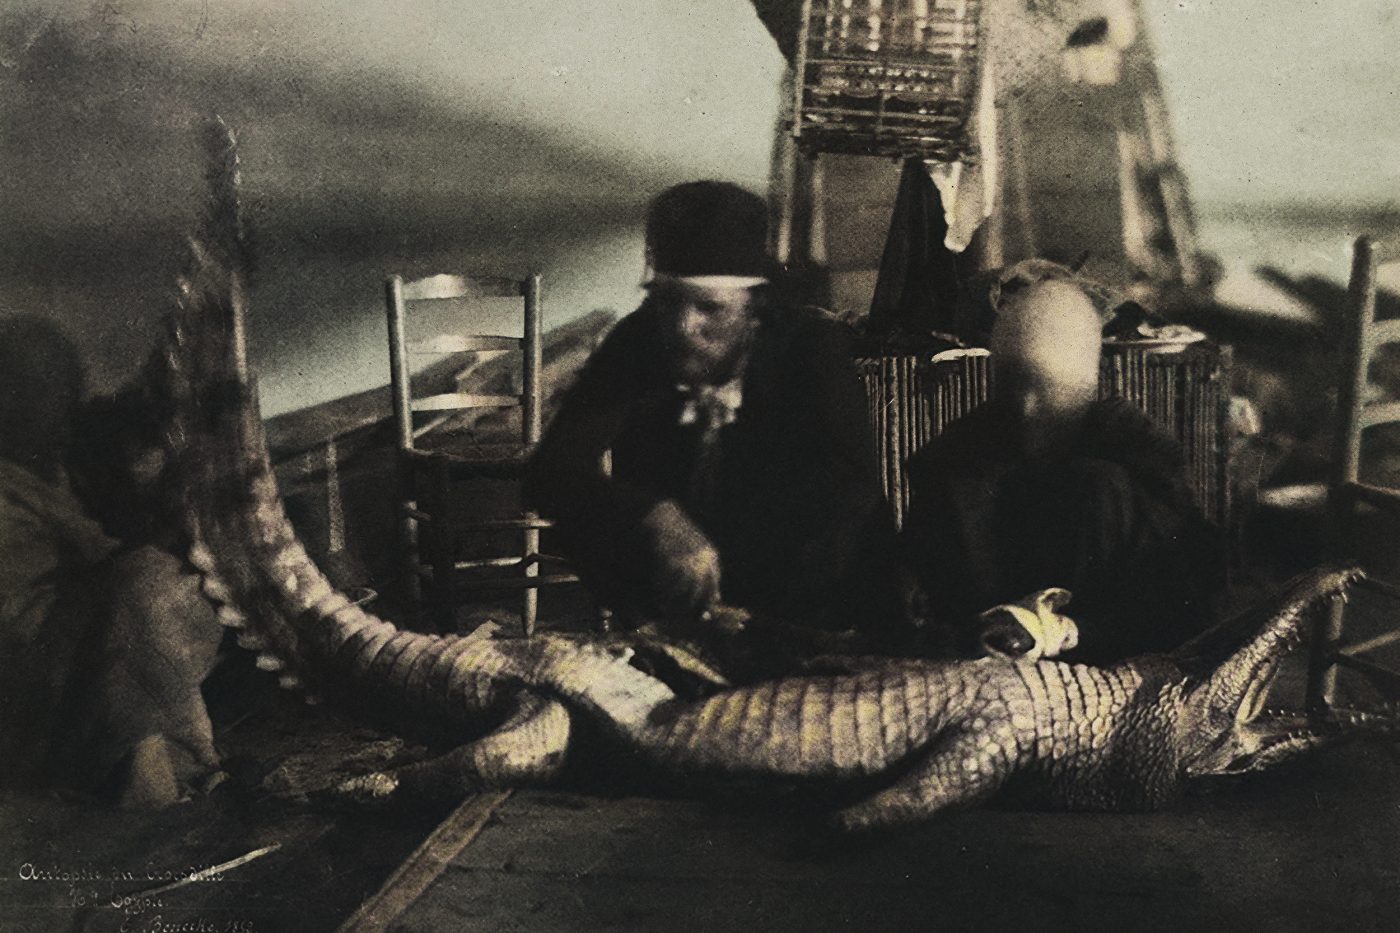 A close up of one of the black and white images included in the exhibition. Three men whose faces have been blurred, kneel to examine a crocodile.